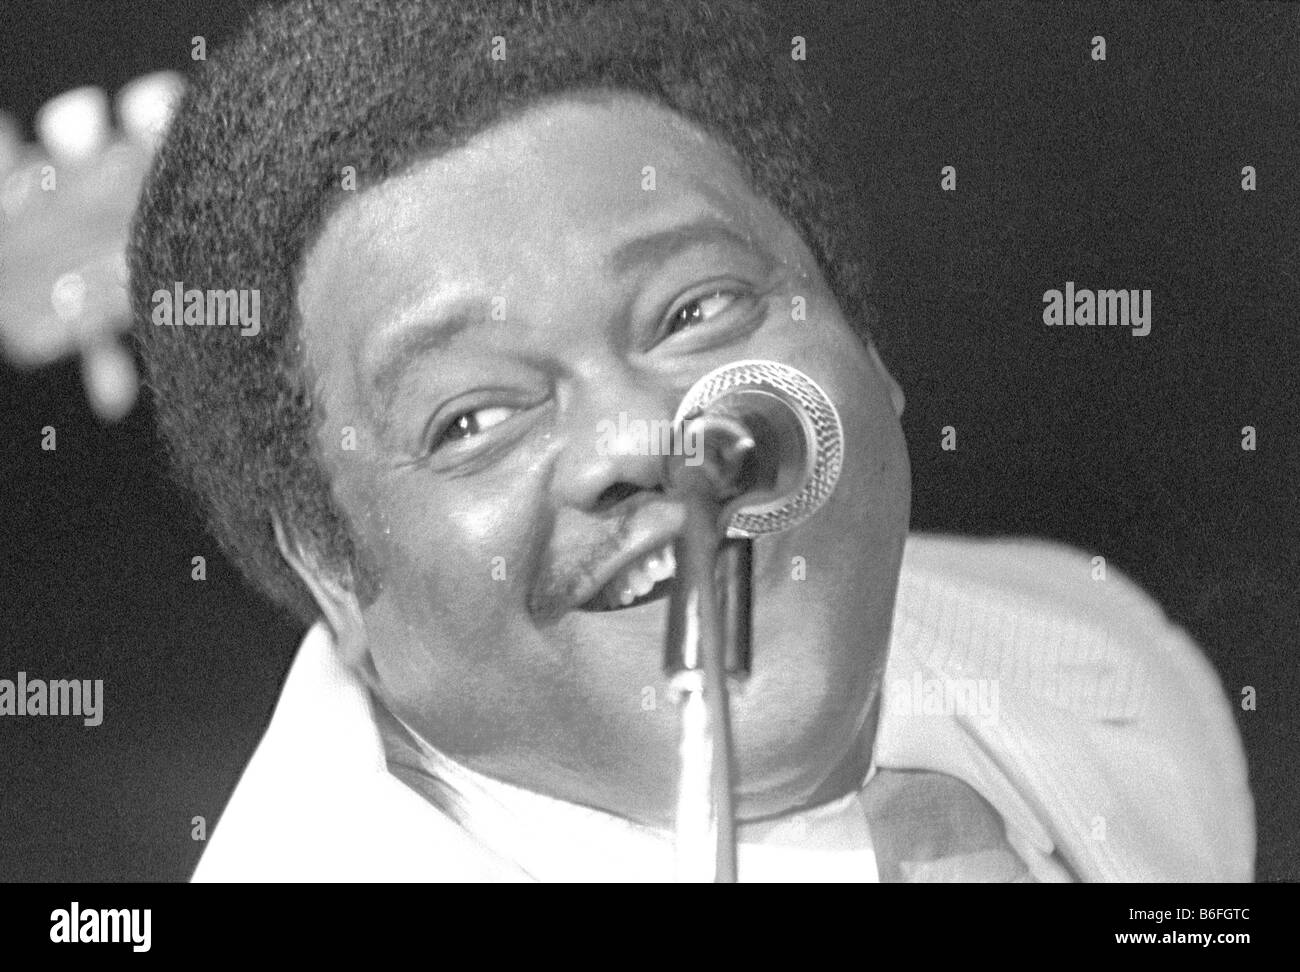 Fats Domino concert, Eutiner Jazz Days, on July 23, 1980 in Germany, Europe Stock Photo